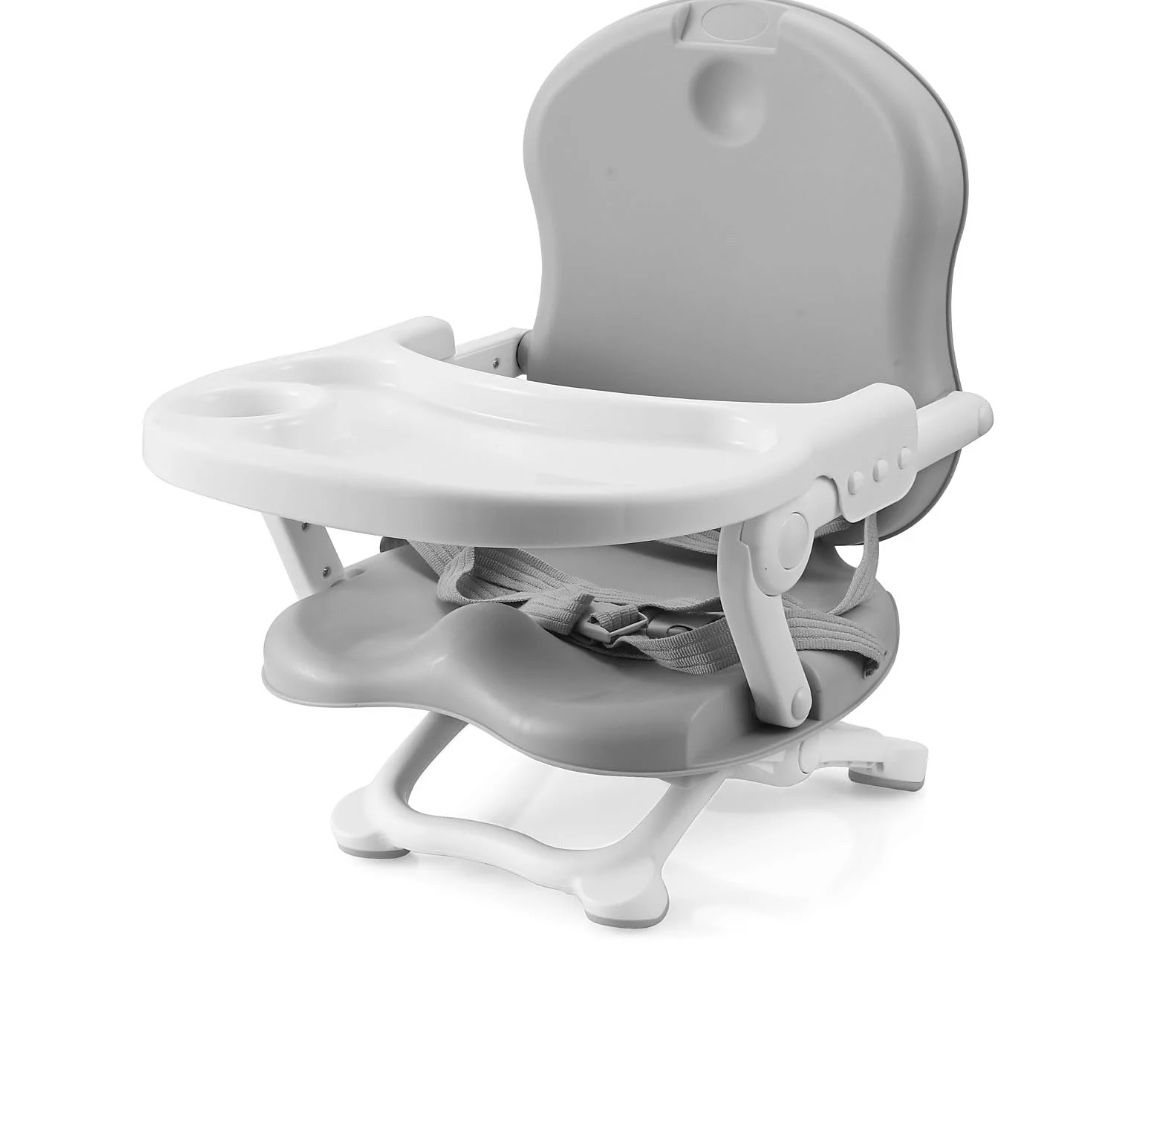 High Chair for Toddlers Folding Compact Booster Seat, Portable Booster Seat for Babies & Kids Chair on Chair for Dining